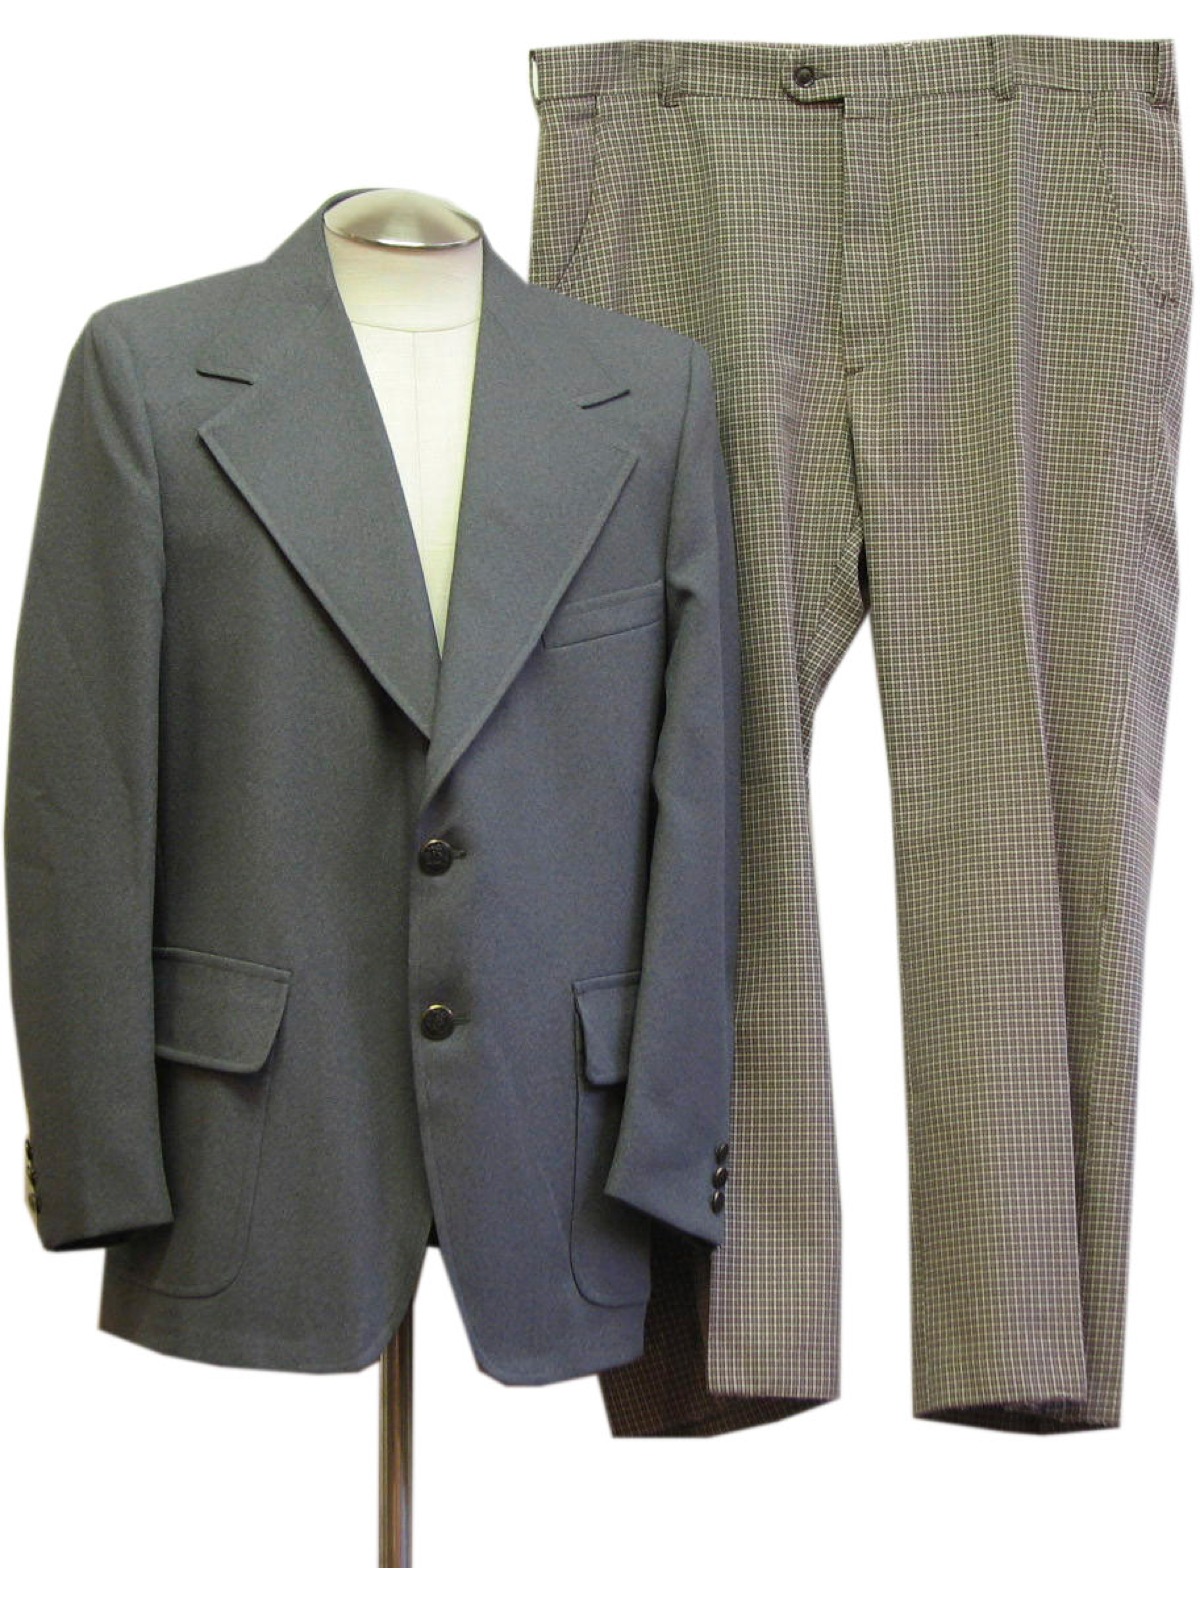 Men's vintage suits: 60 bold power suits that were essential fashion in the  1970s - Click Americana | Vintage suit men, Vintage suits, Suits